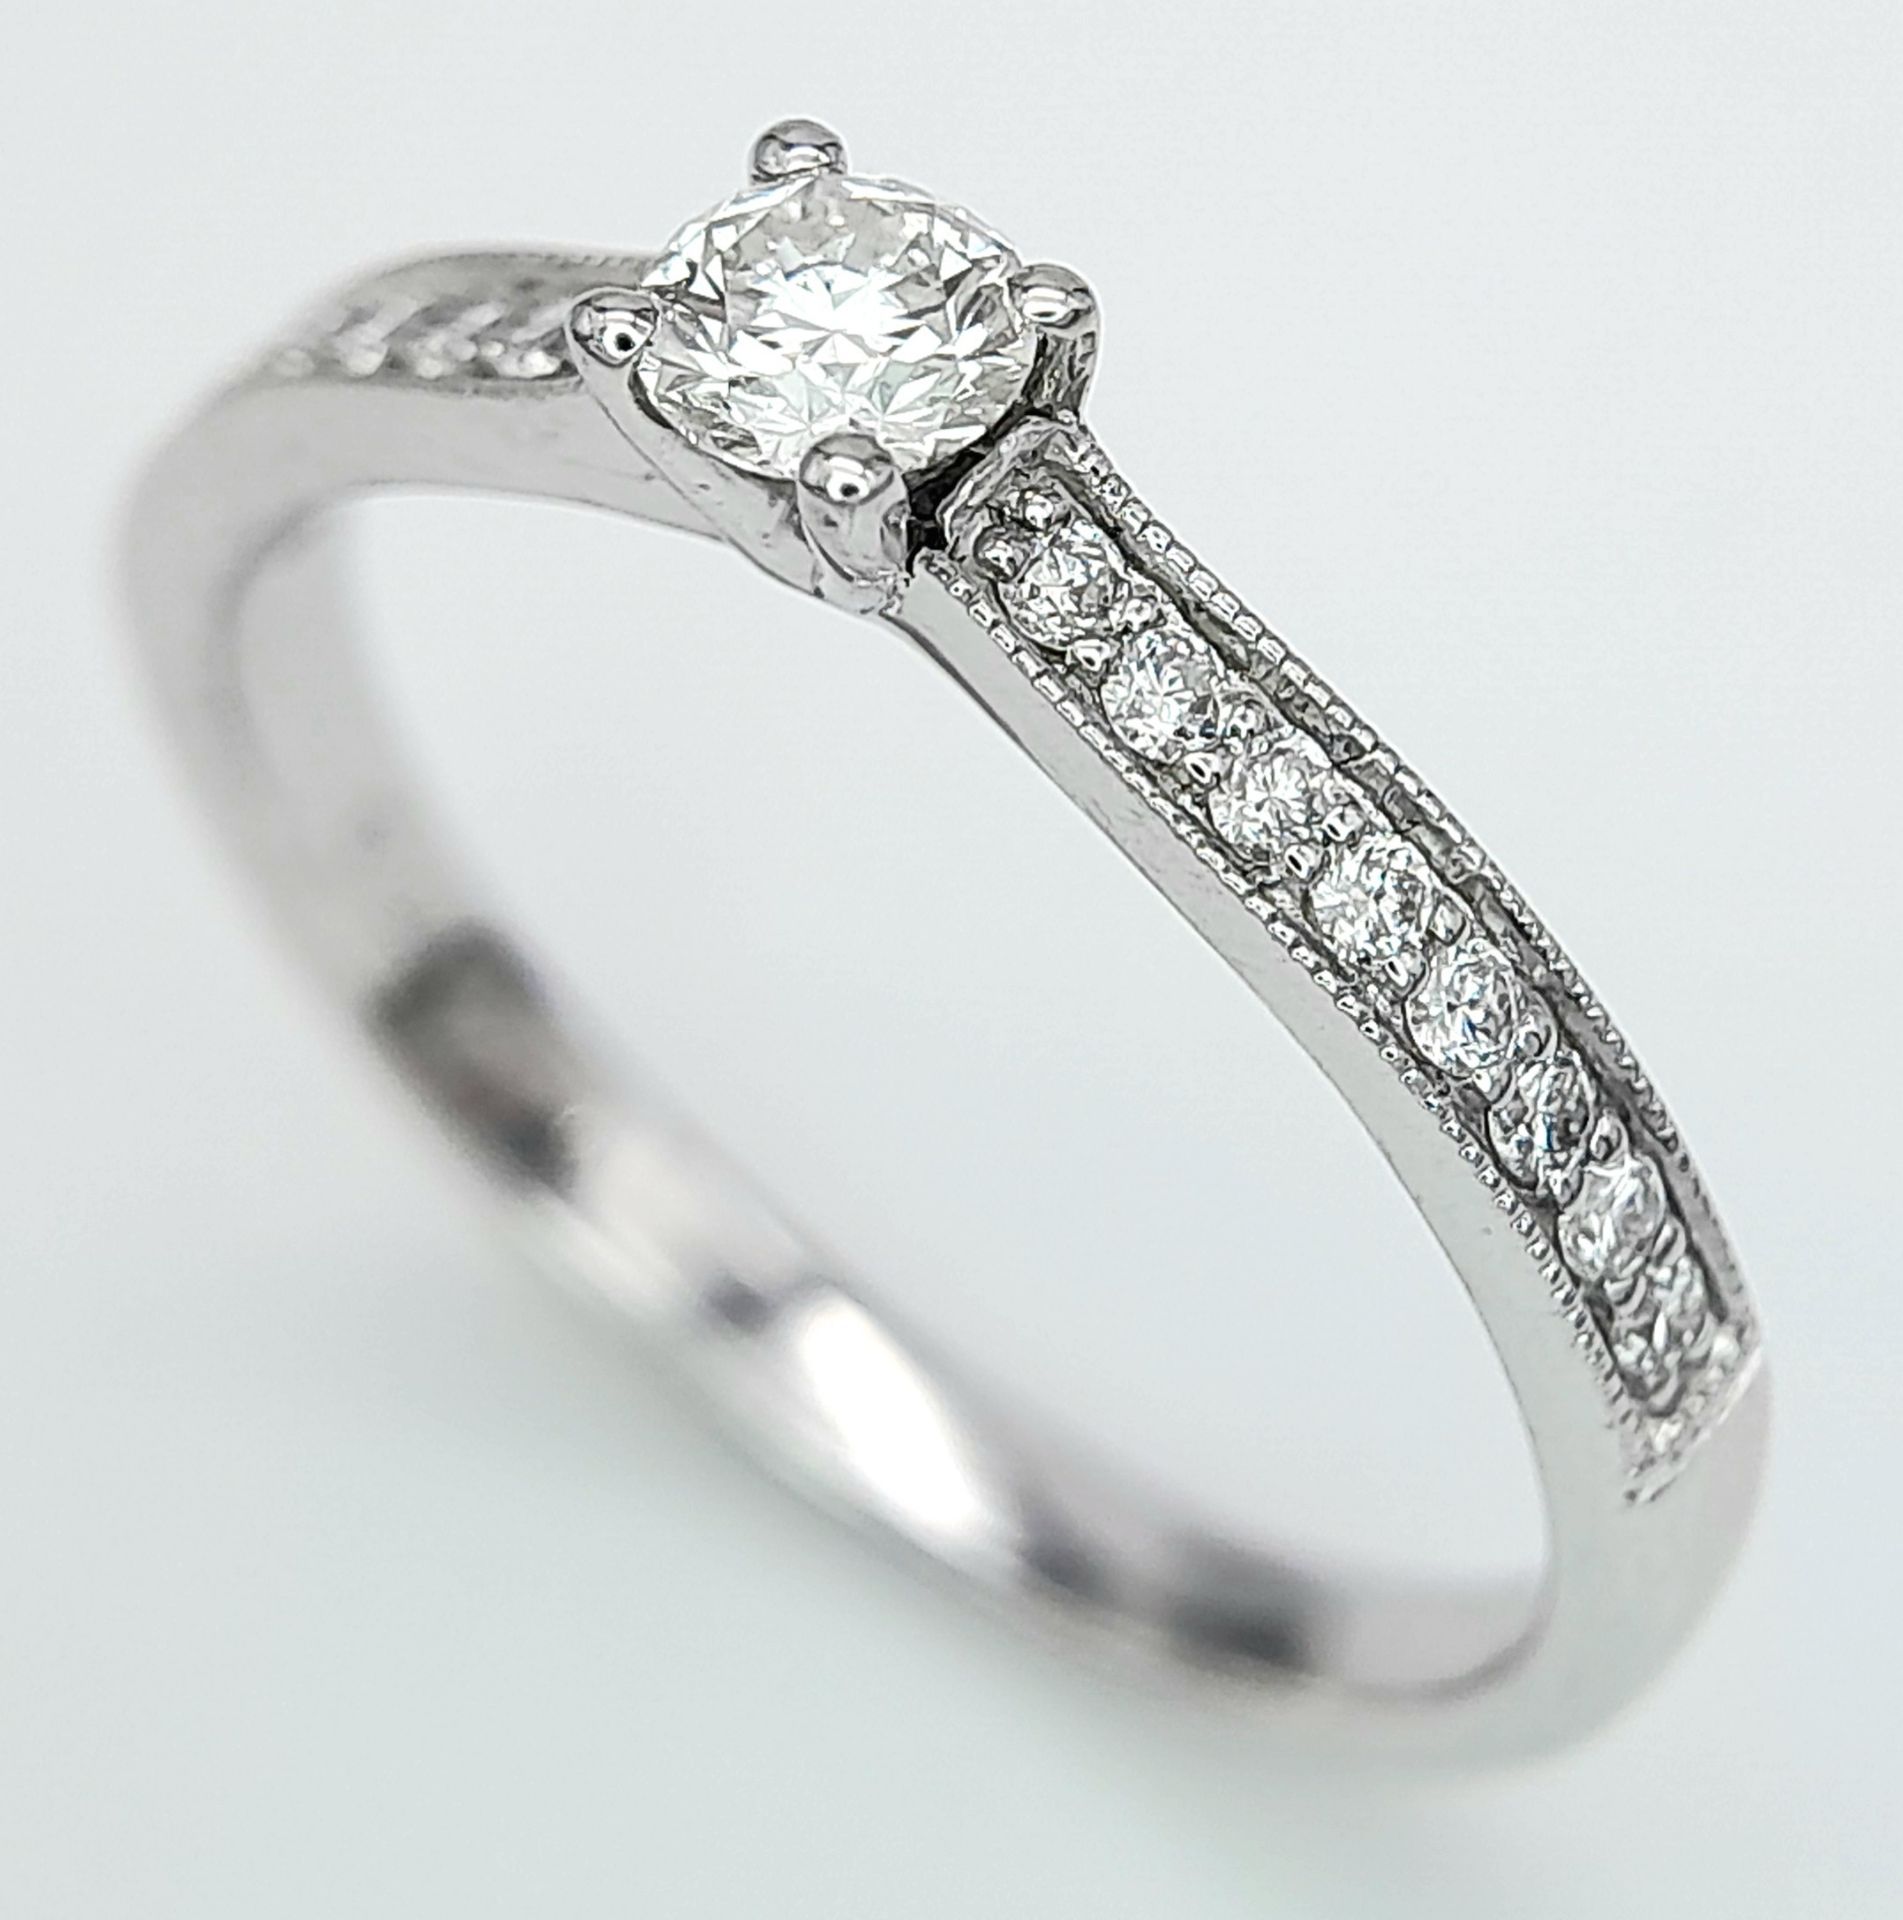 AN 18K WHITE GOLD DIAMOND SOLITAIRE RING - WITH DIAMOND SET SHOULDERS. 0.35CT. TOTAL 2.6G. SIZE N